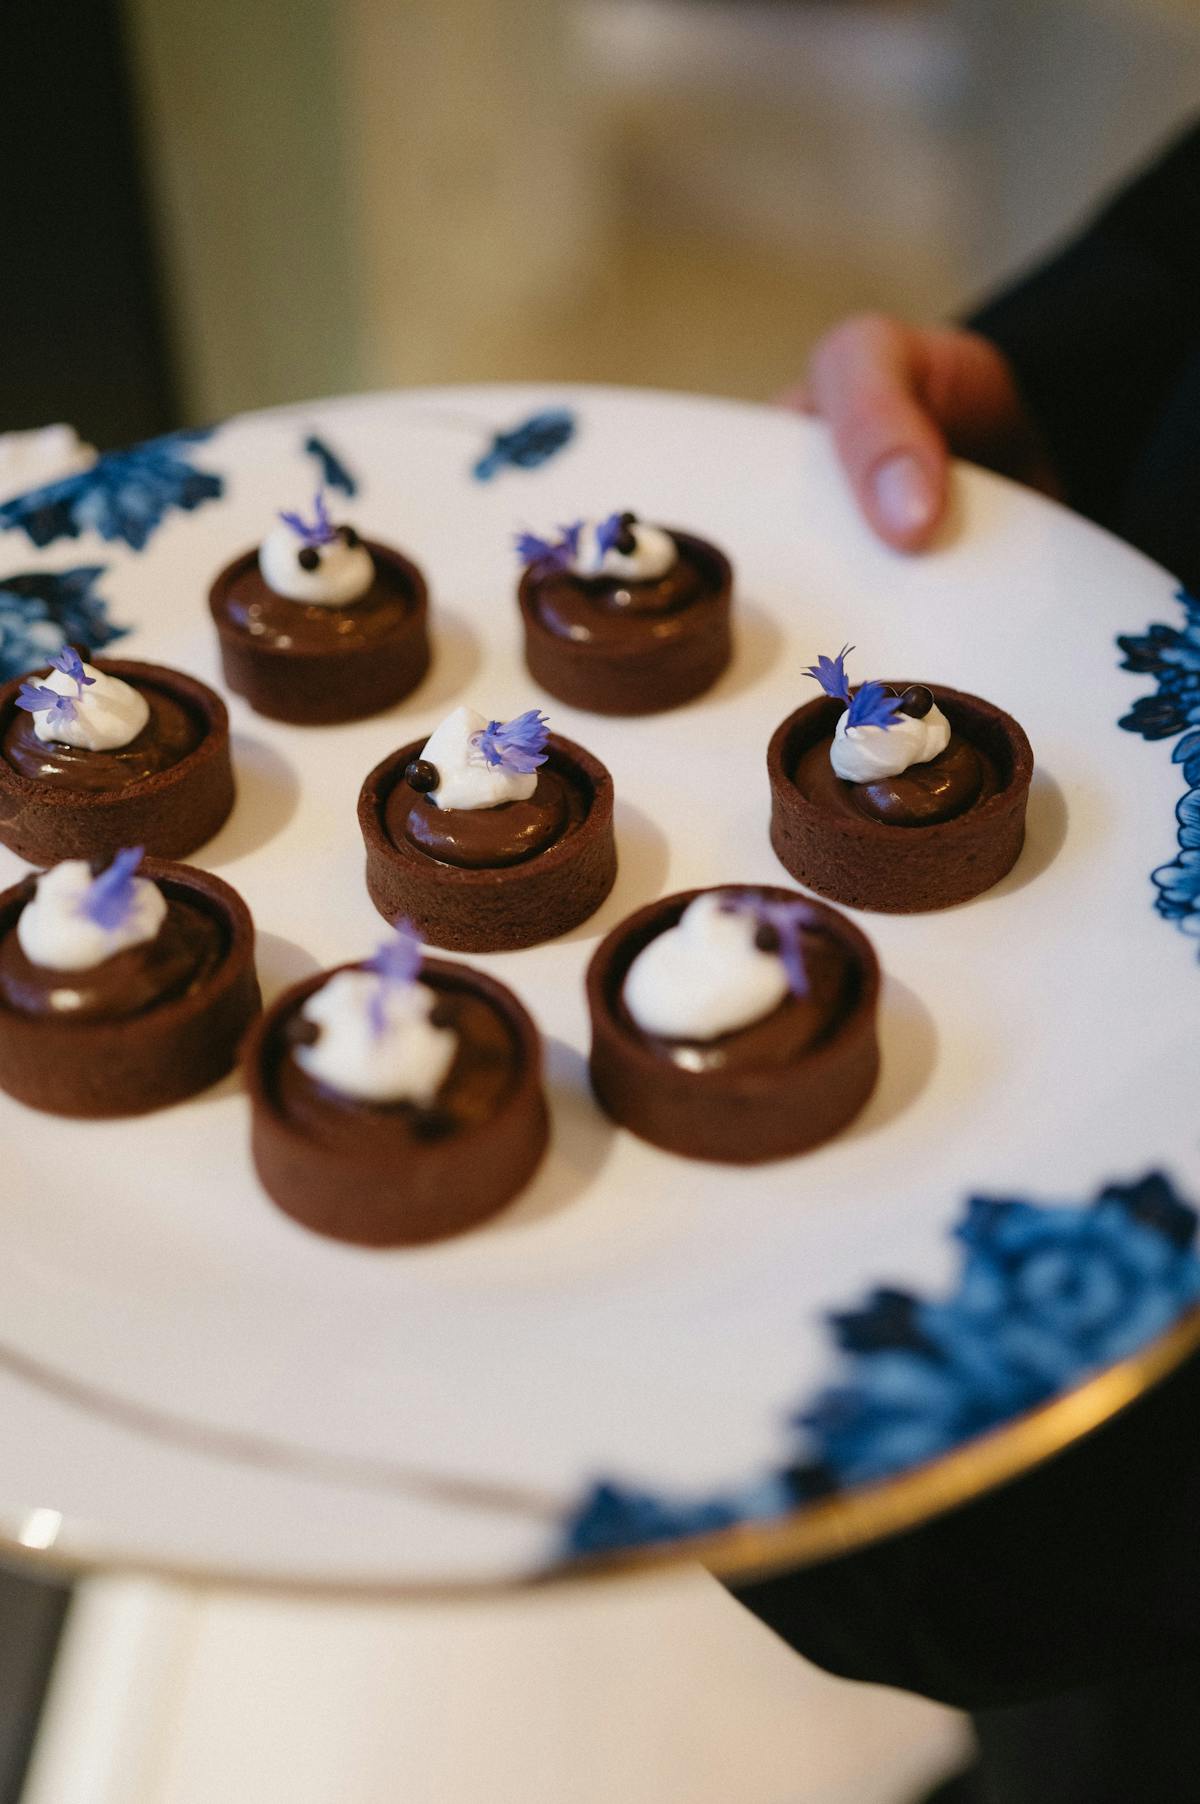 A tray of chocolate dessert being passed at an event.